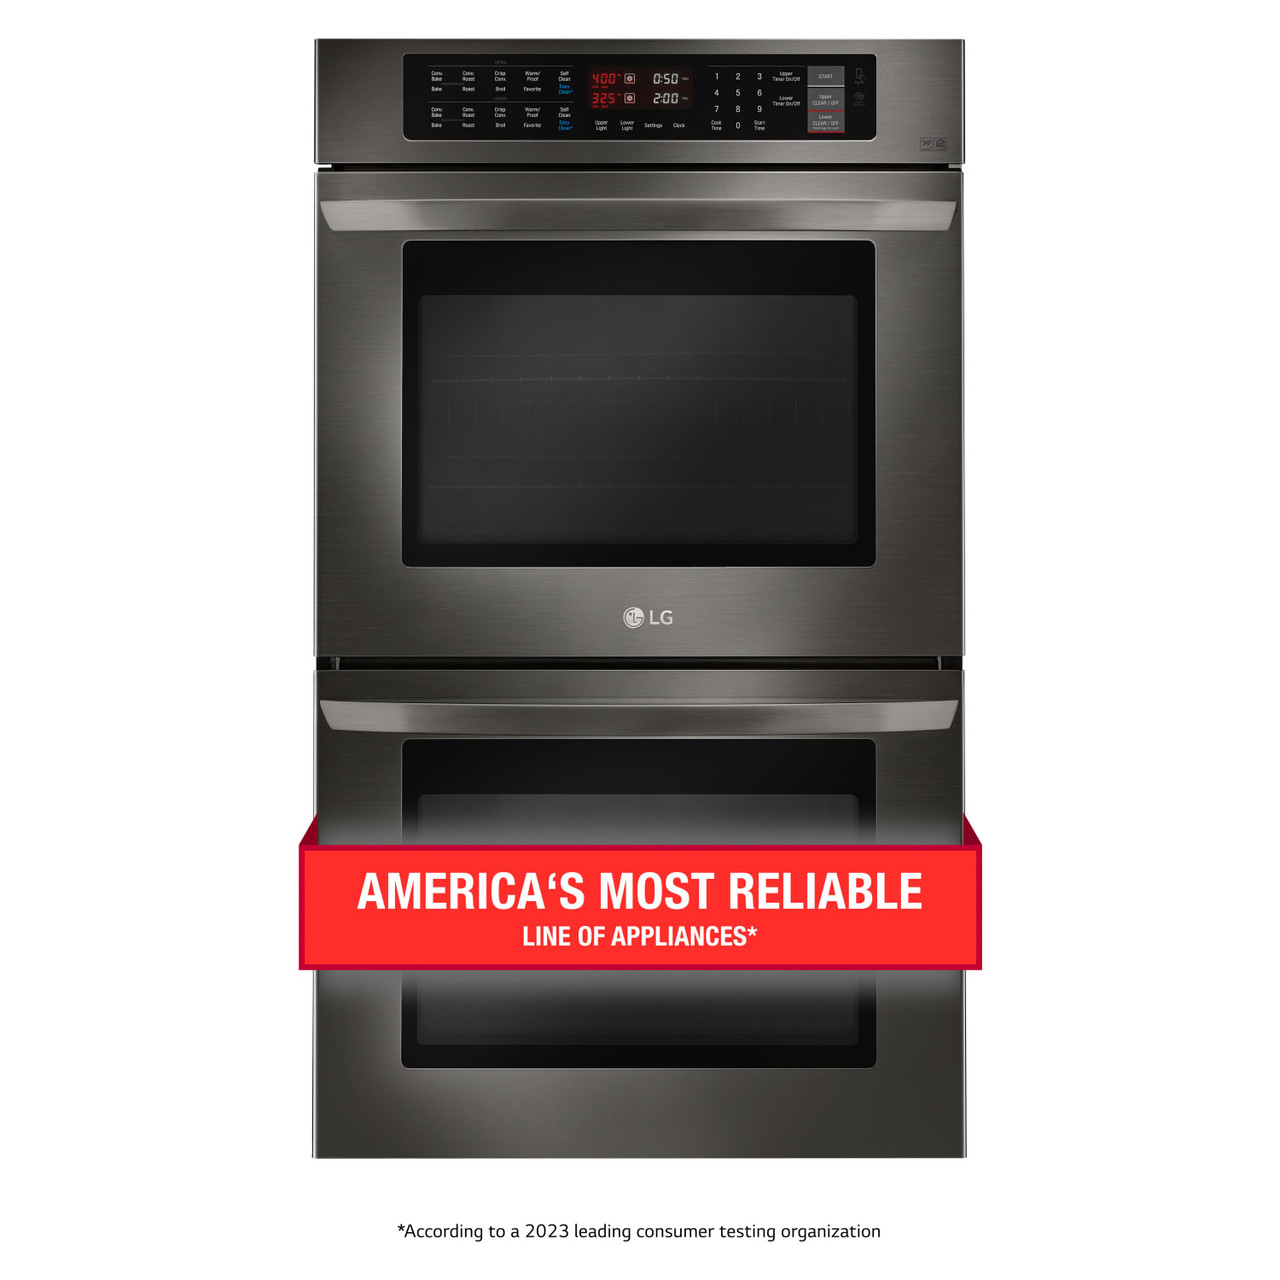 LG 9.4 cu. ft. Double Wall Oven in Black Stainless Steel - LWD3063BD